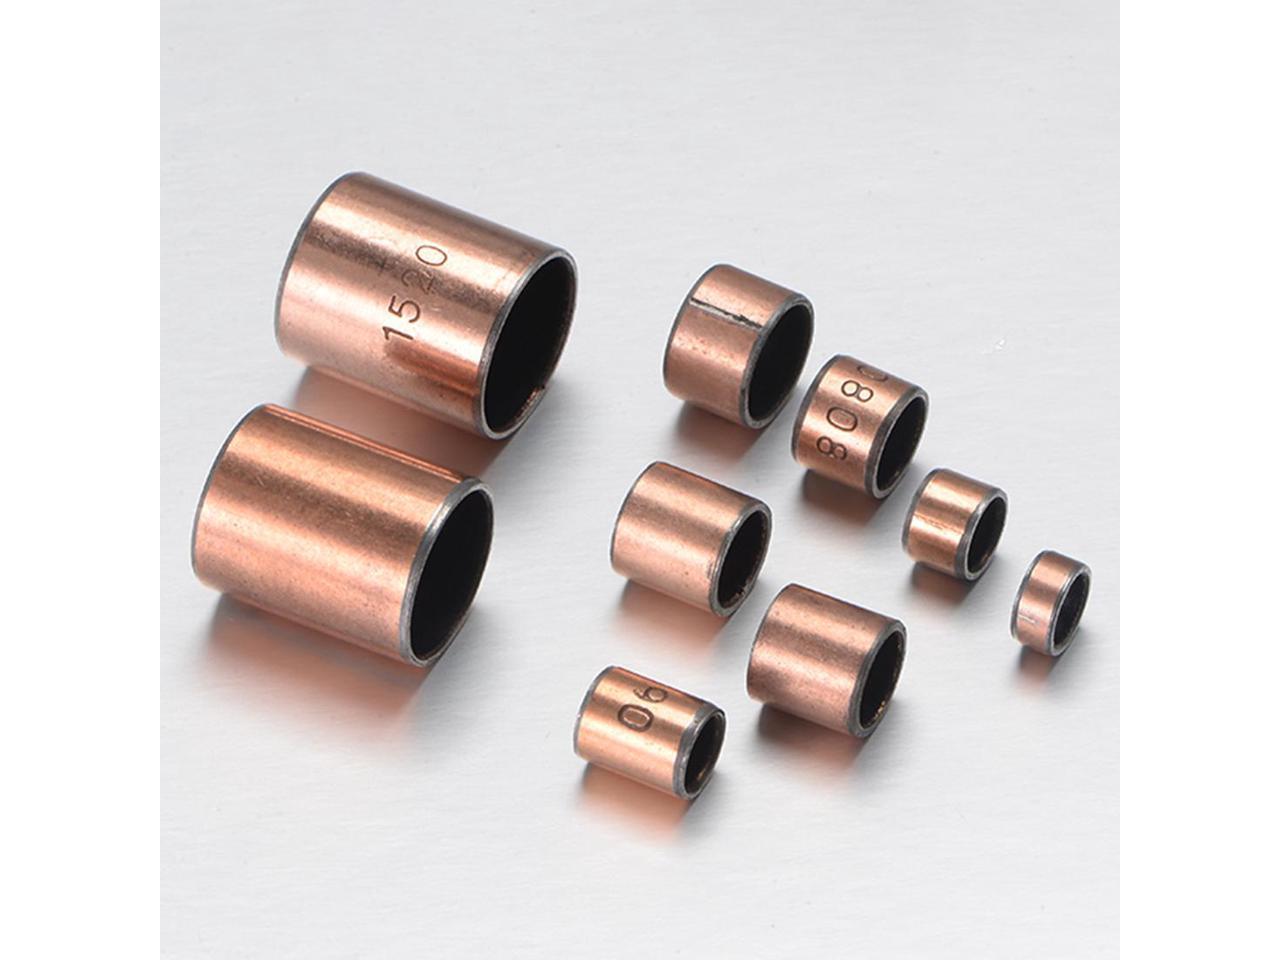 uxcell Sleeve Bearing 6mm Bore x 8mm OD x 4mm Length Plain Bearings Wrapped Oilless Bushings Pack of 10